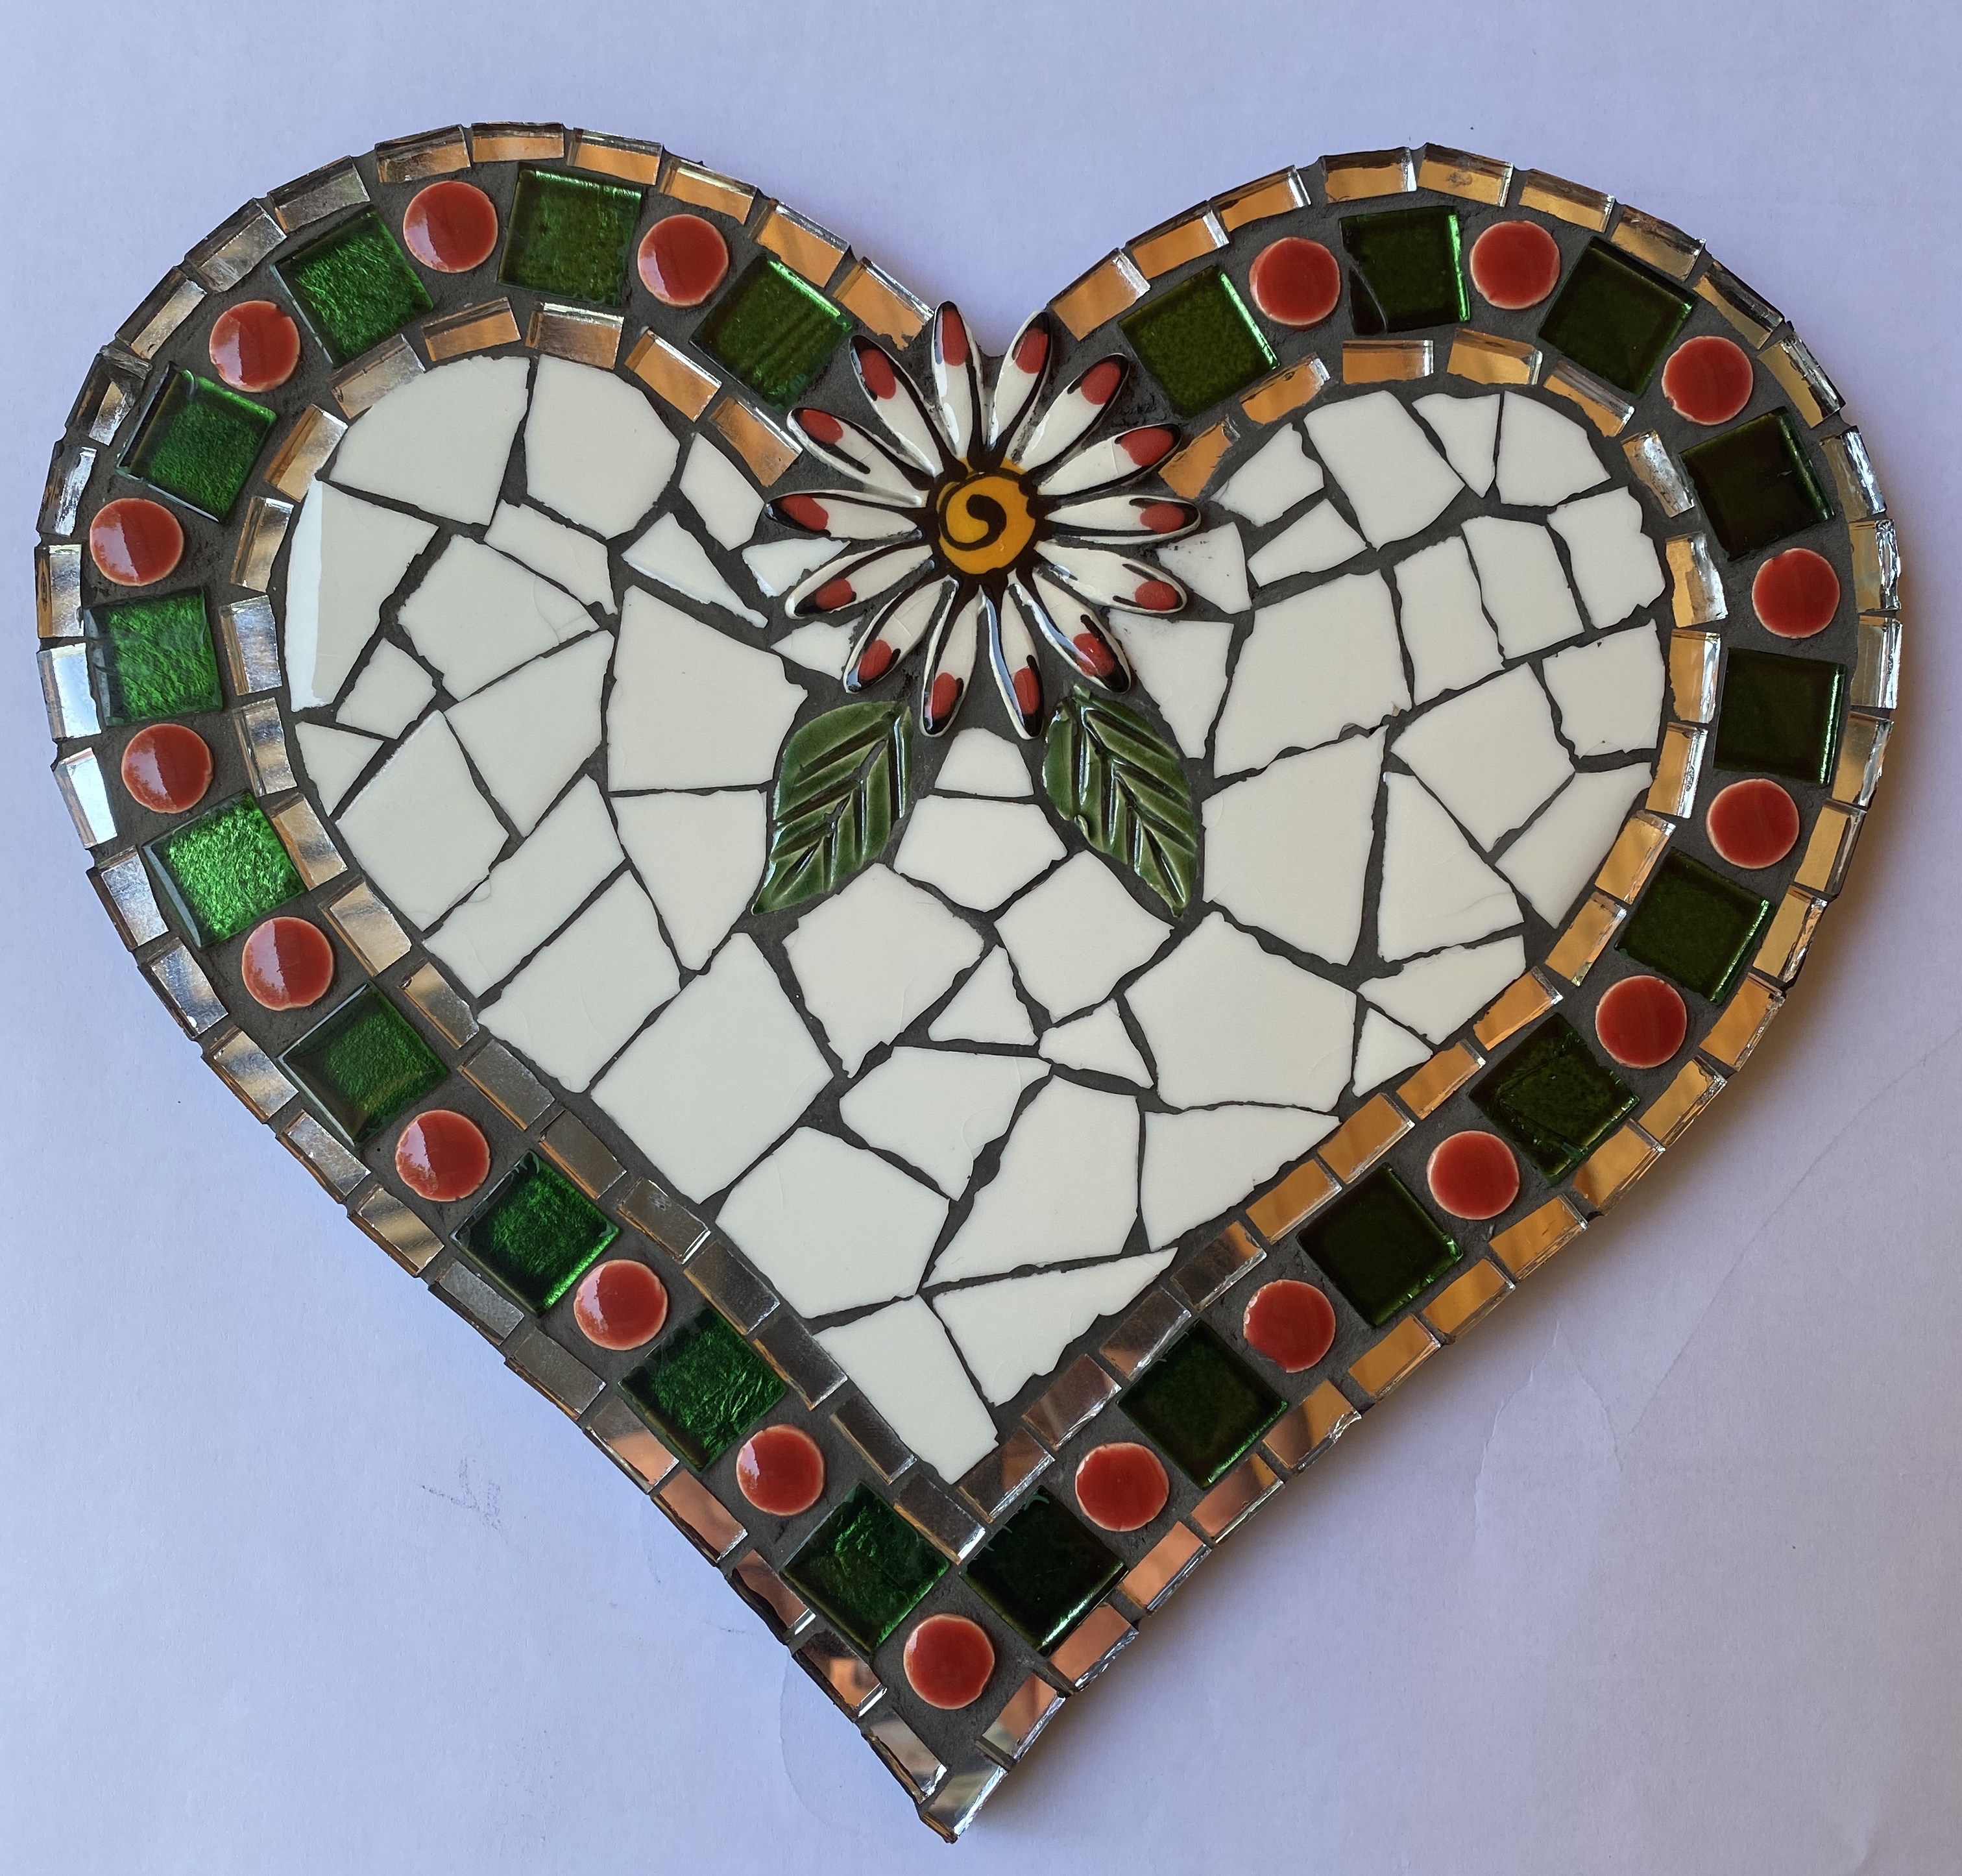 heart-kit-with-flower-and-green-tiles--2-sizes-in-quick-view